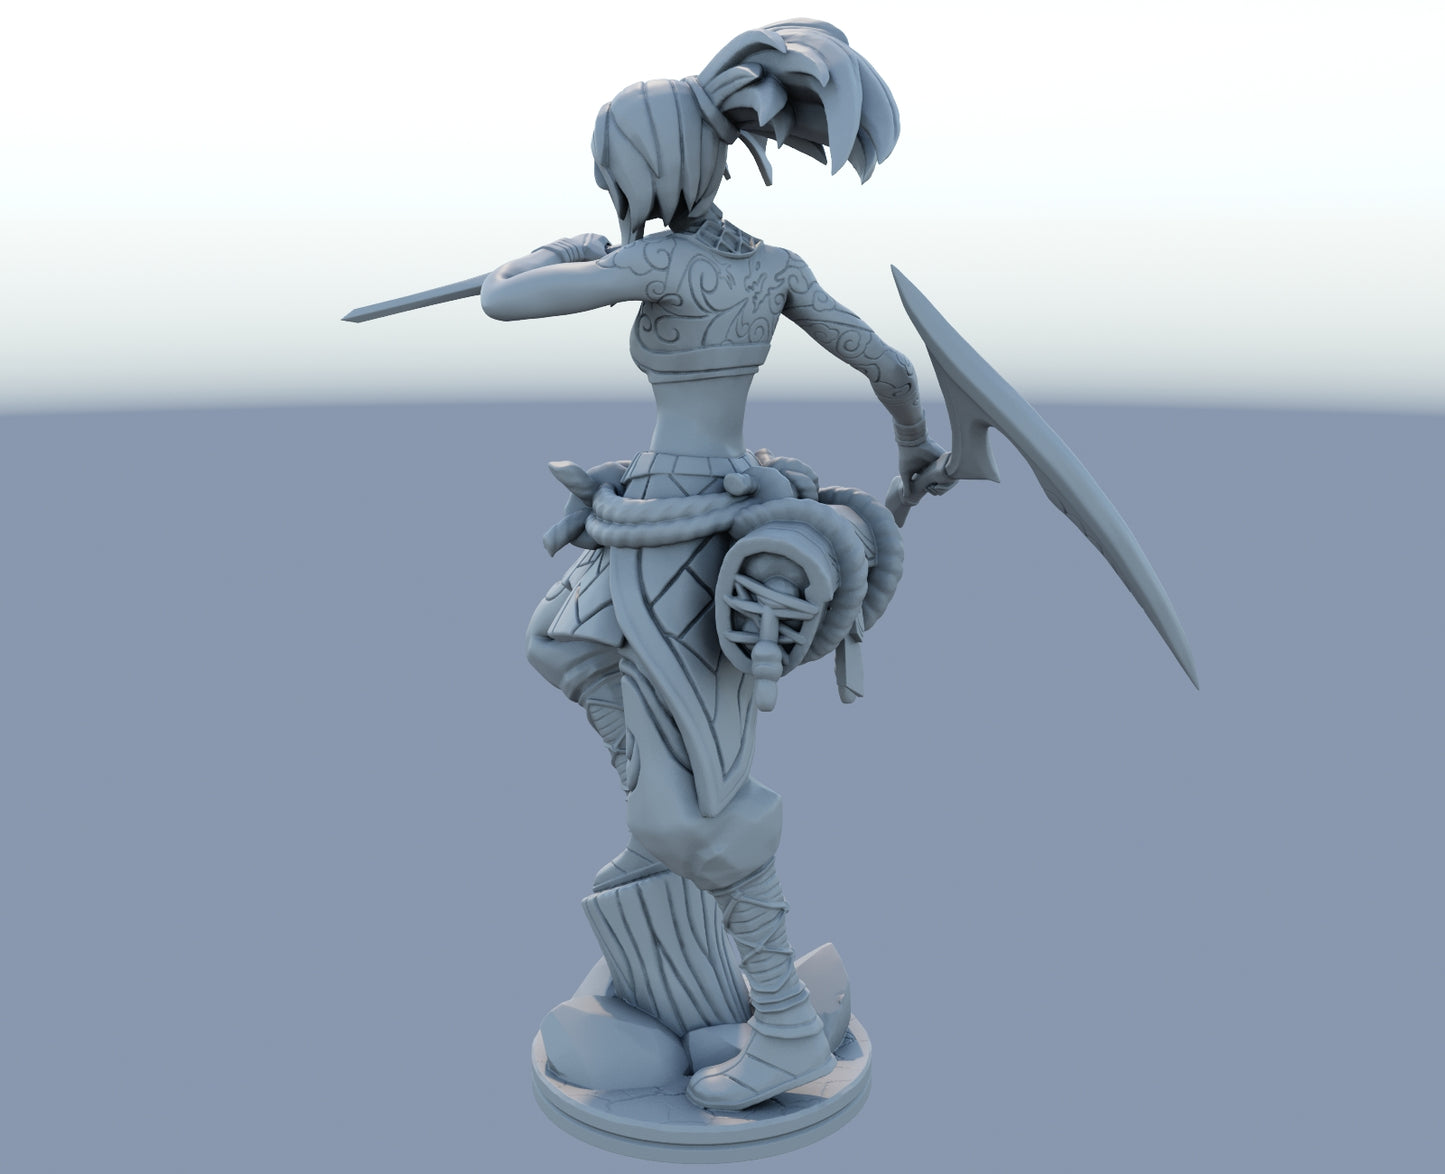 Akali 3D-printed League of Legends champion figure. Decorate your gaming setup or home with your favorite League of Legends champion! Choose between the unpainted version, perfect for you to paint yourself, or the hand-painted version by a professional painter. Order your figure today!